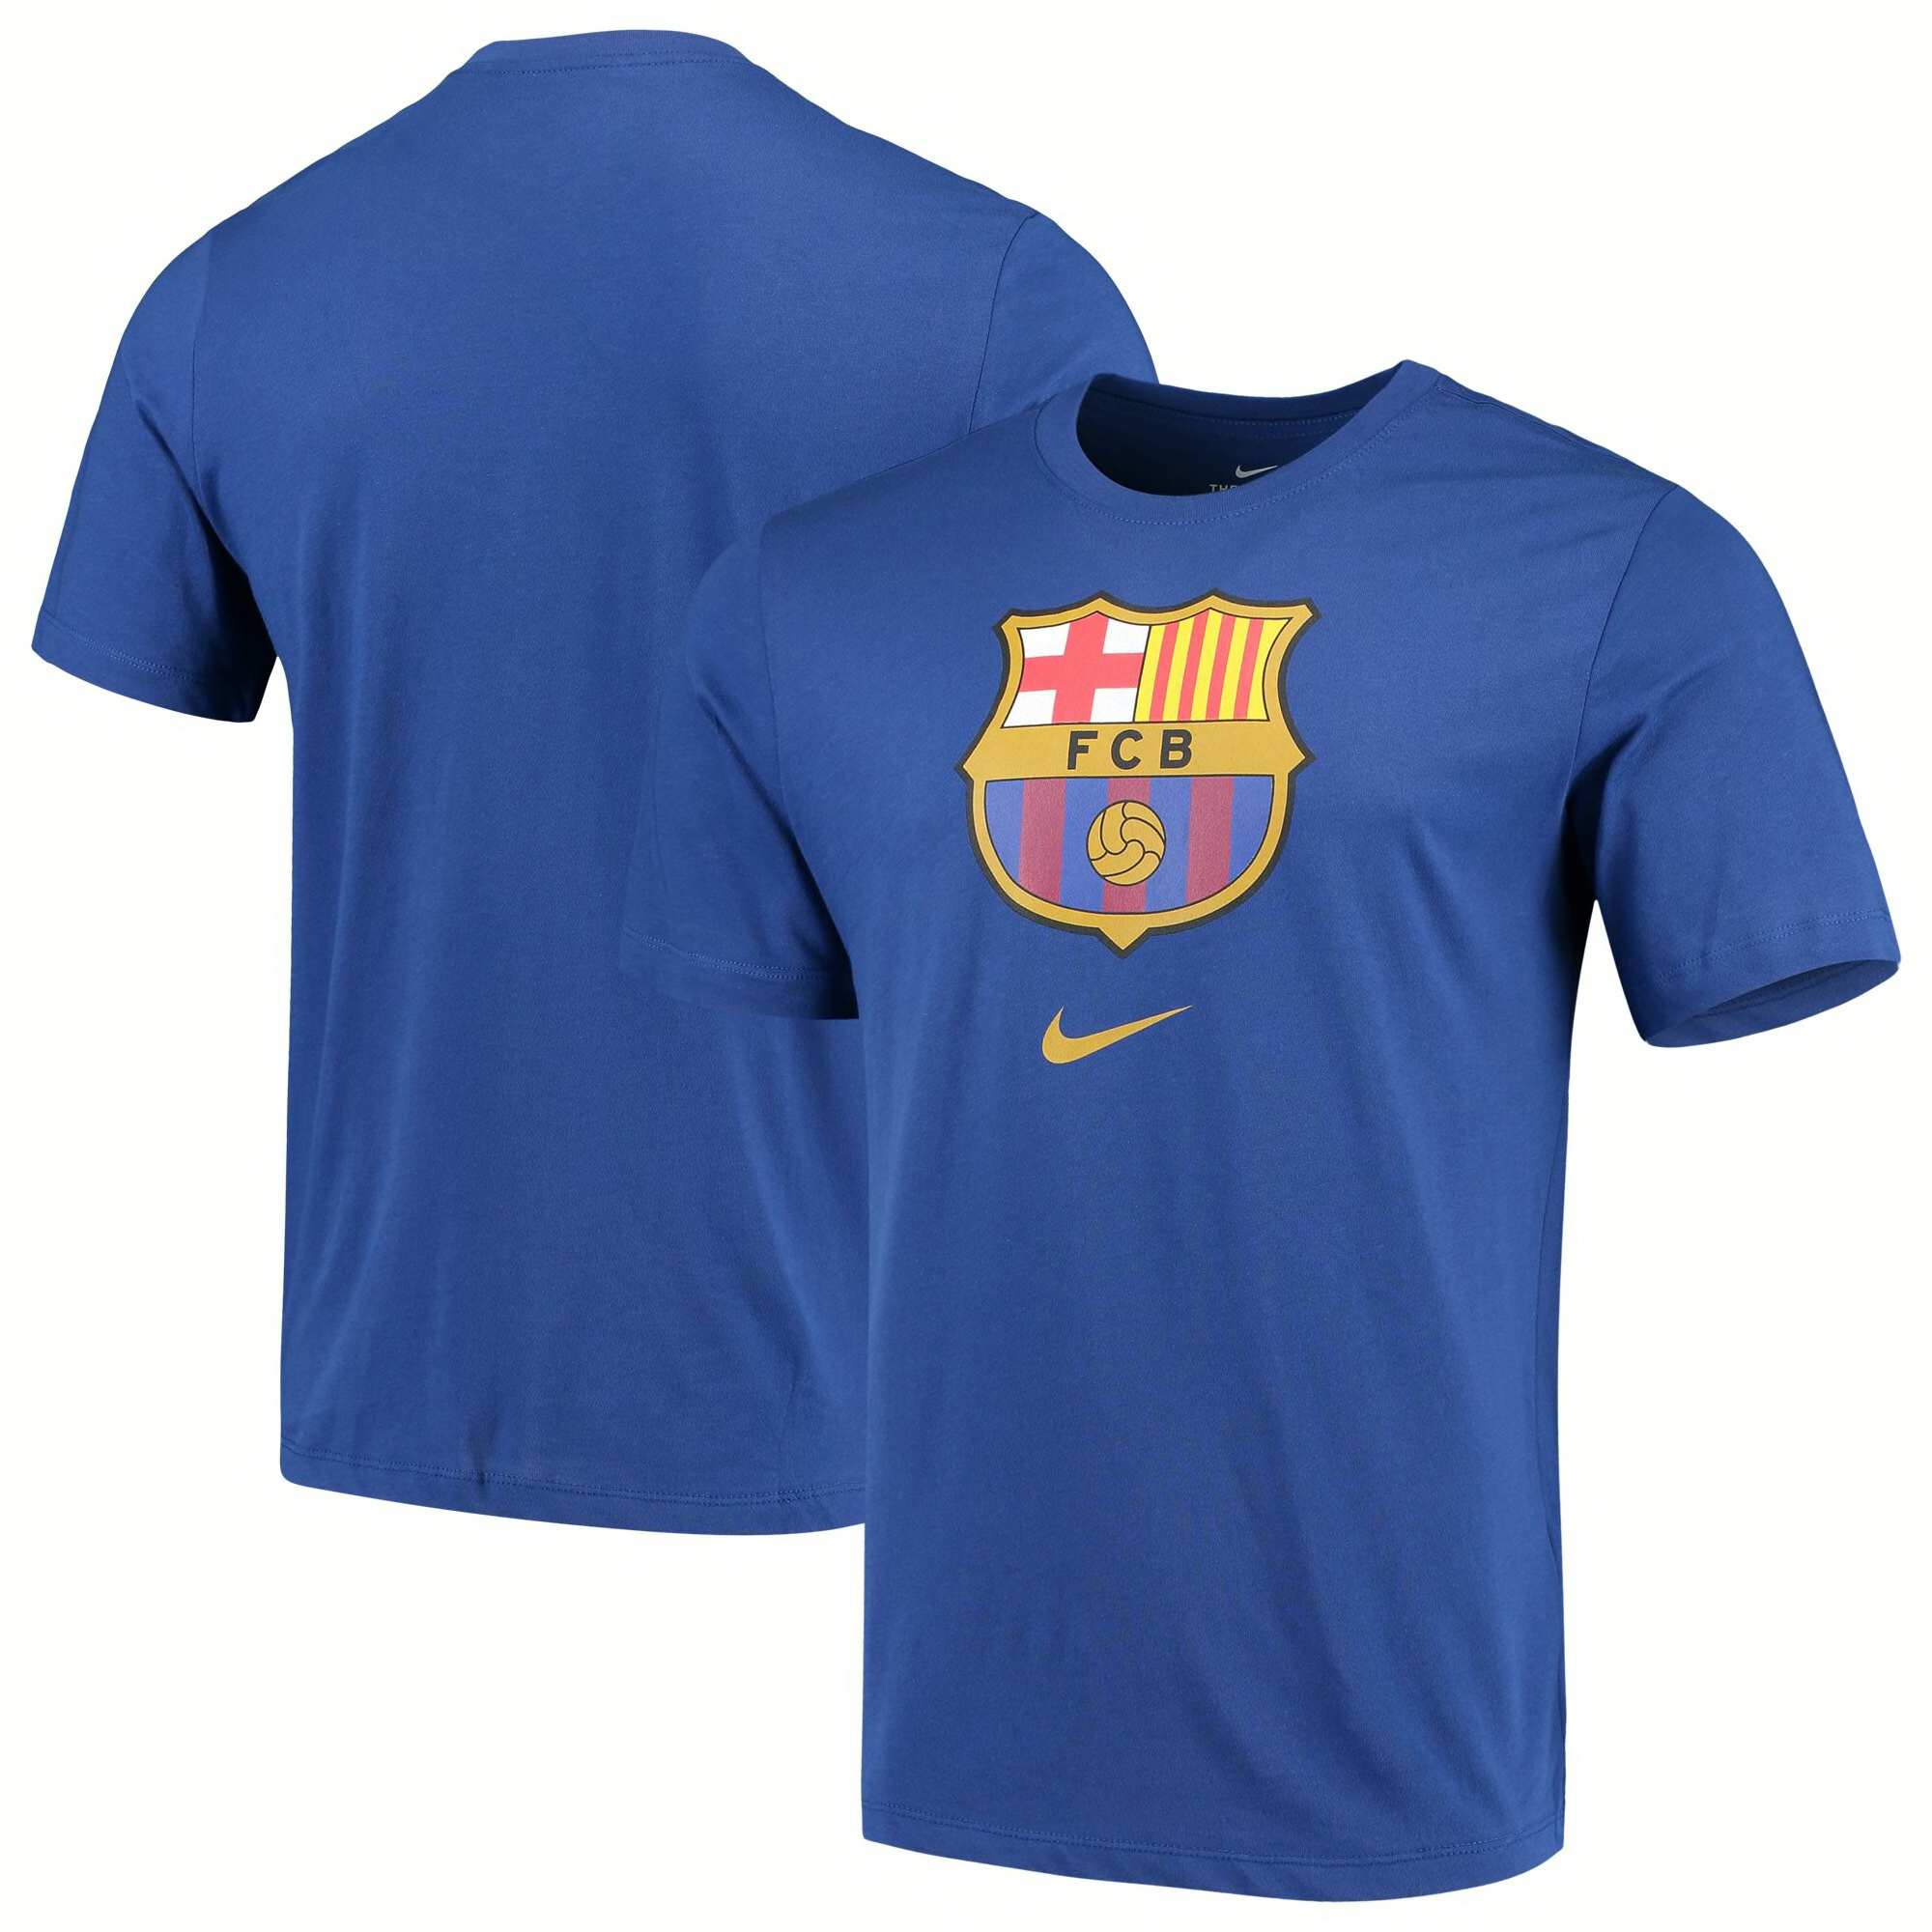 Three Must-Have Items For FC Barcelona Fans